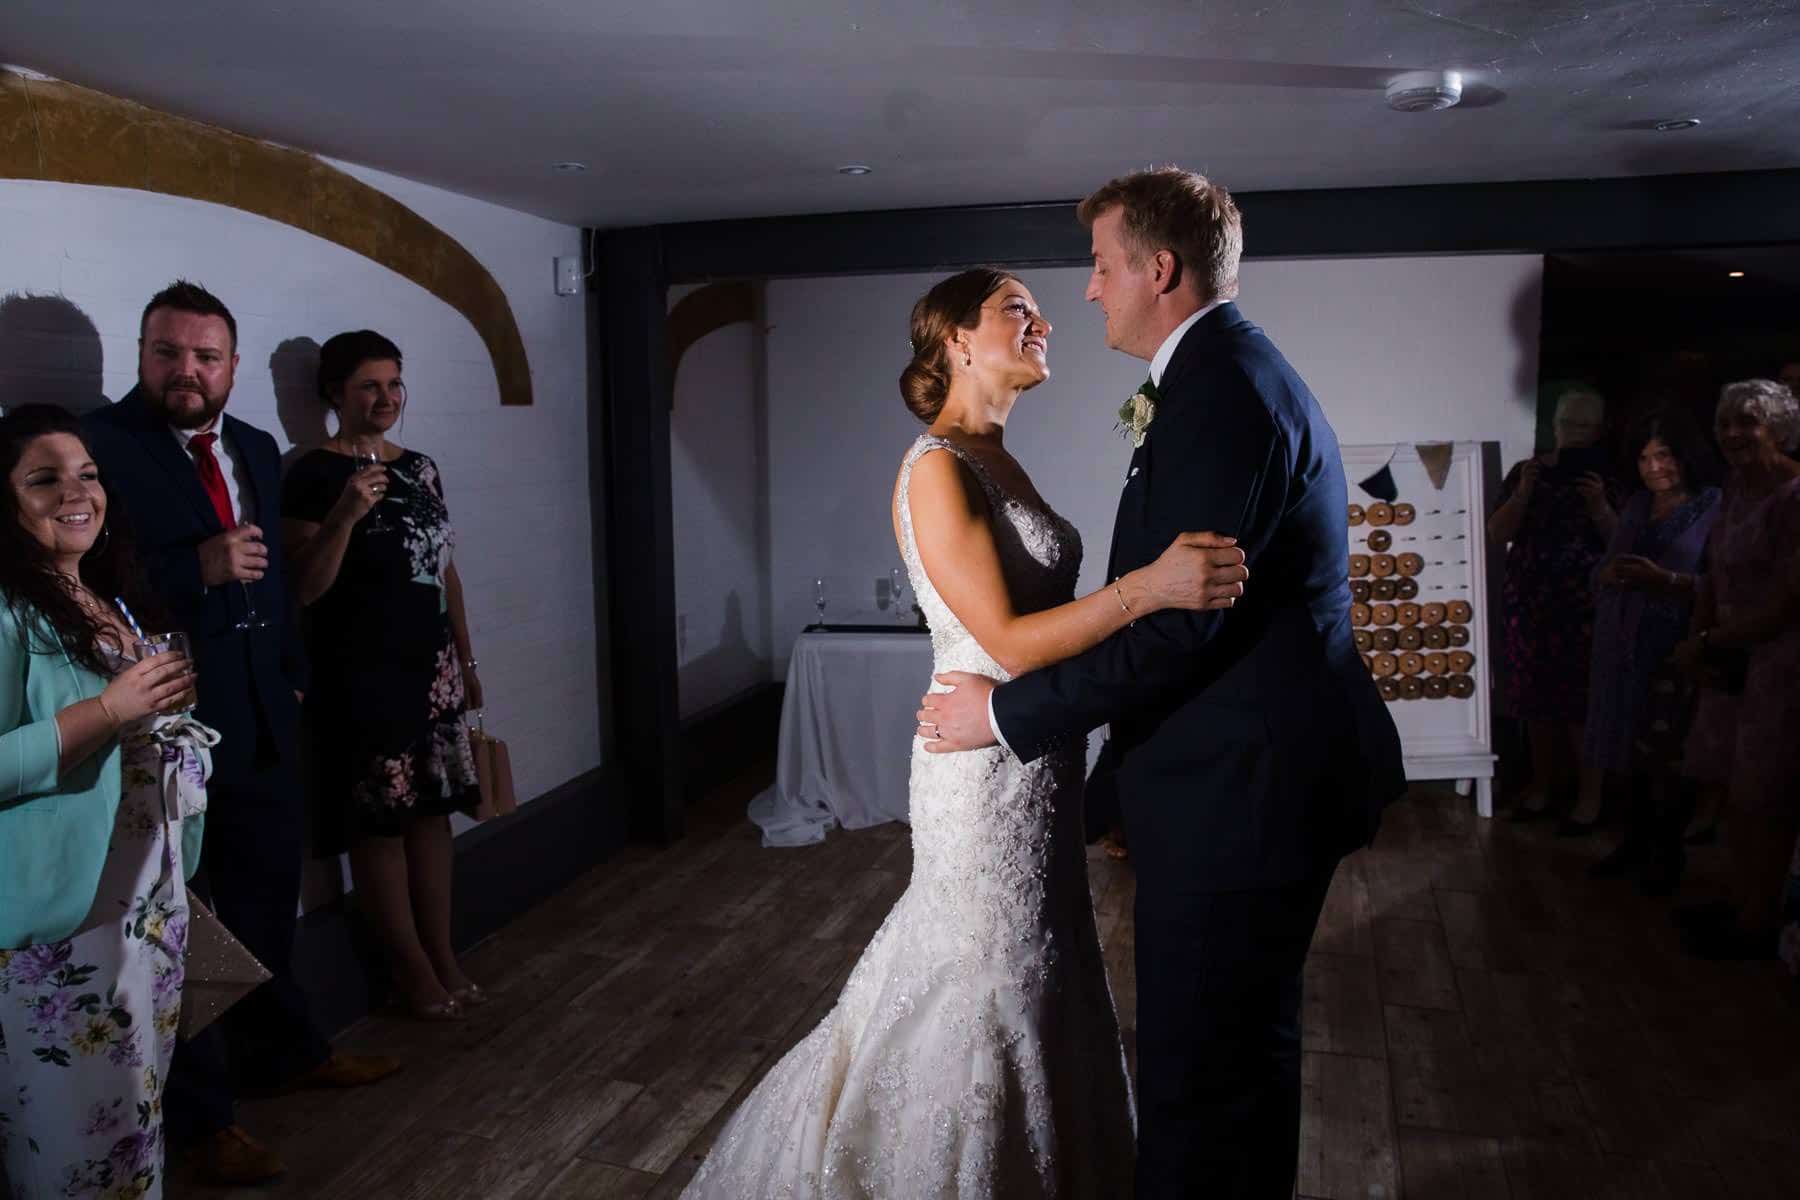 First Dance in a white room surrounded by friends and family